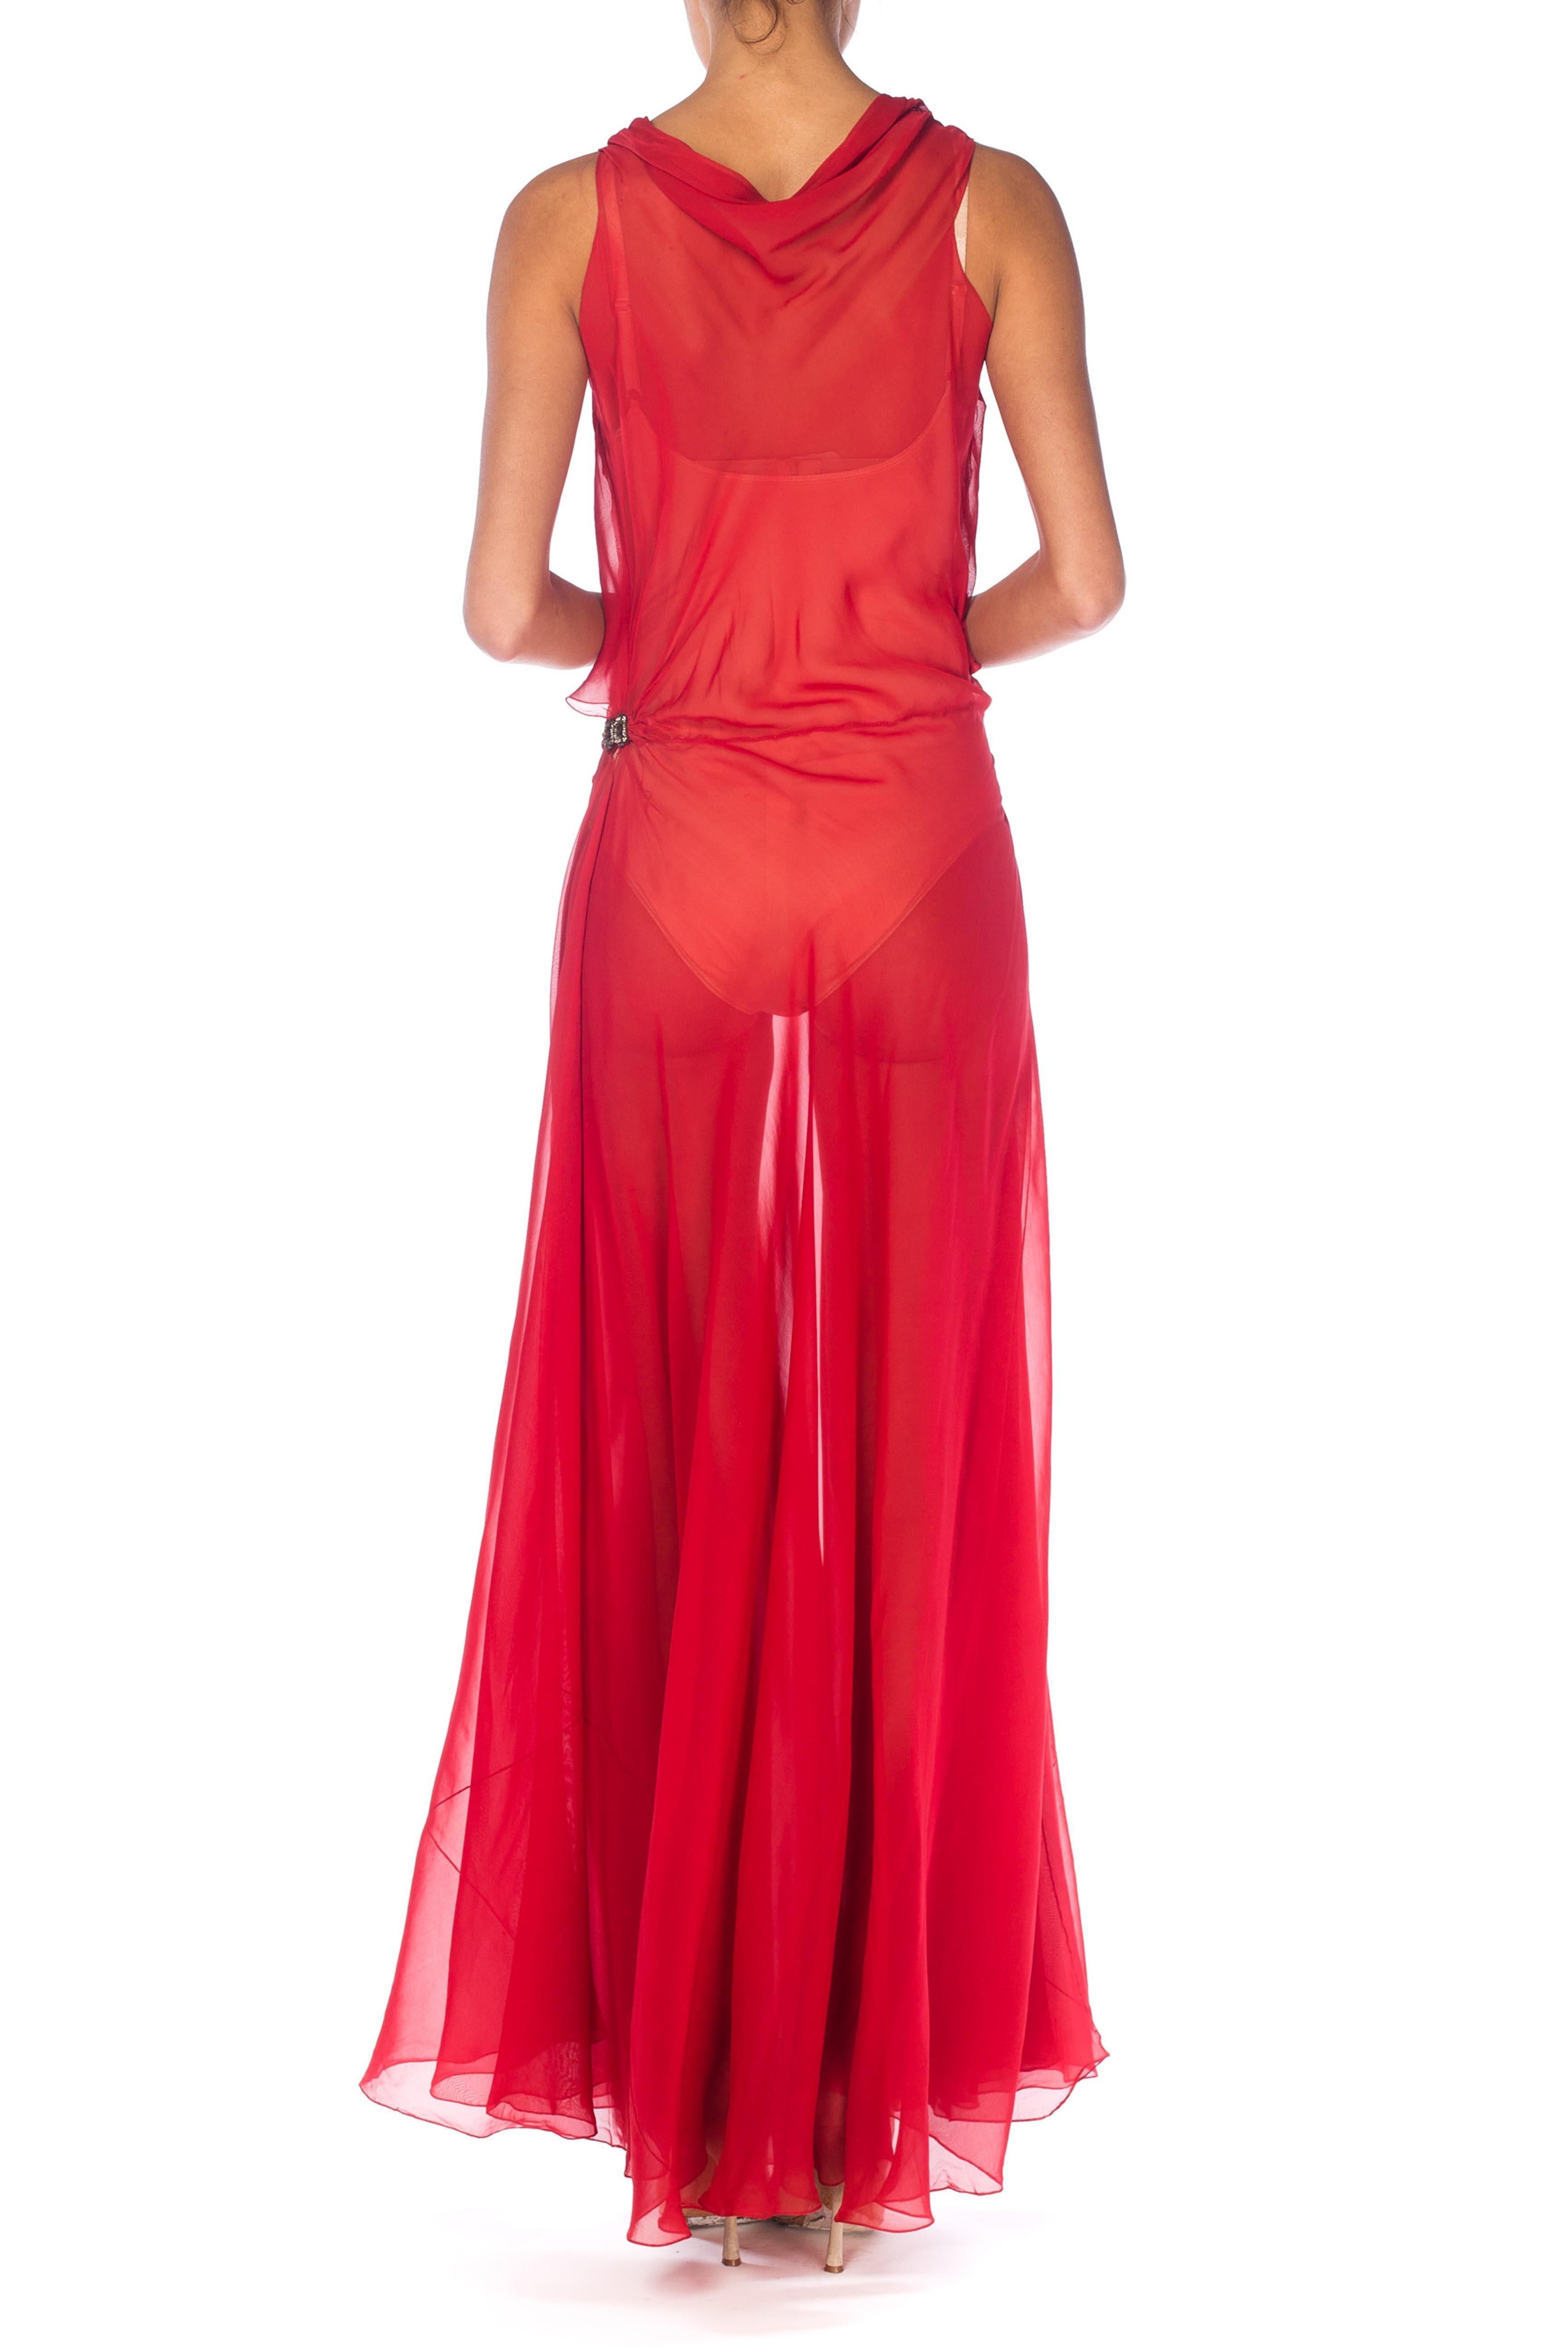 1930S Red Sheer Silk Chiffon Bias-Cut Gown With Deco Clasps On Hips For Sale 1